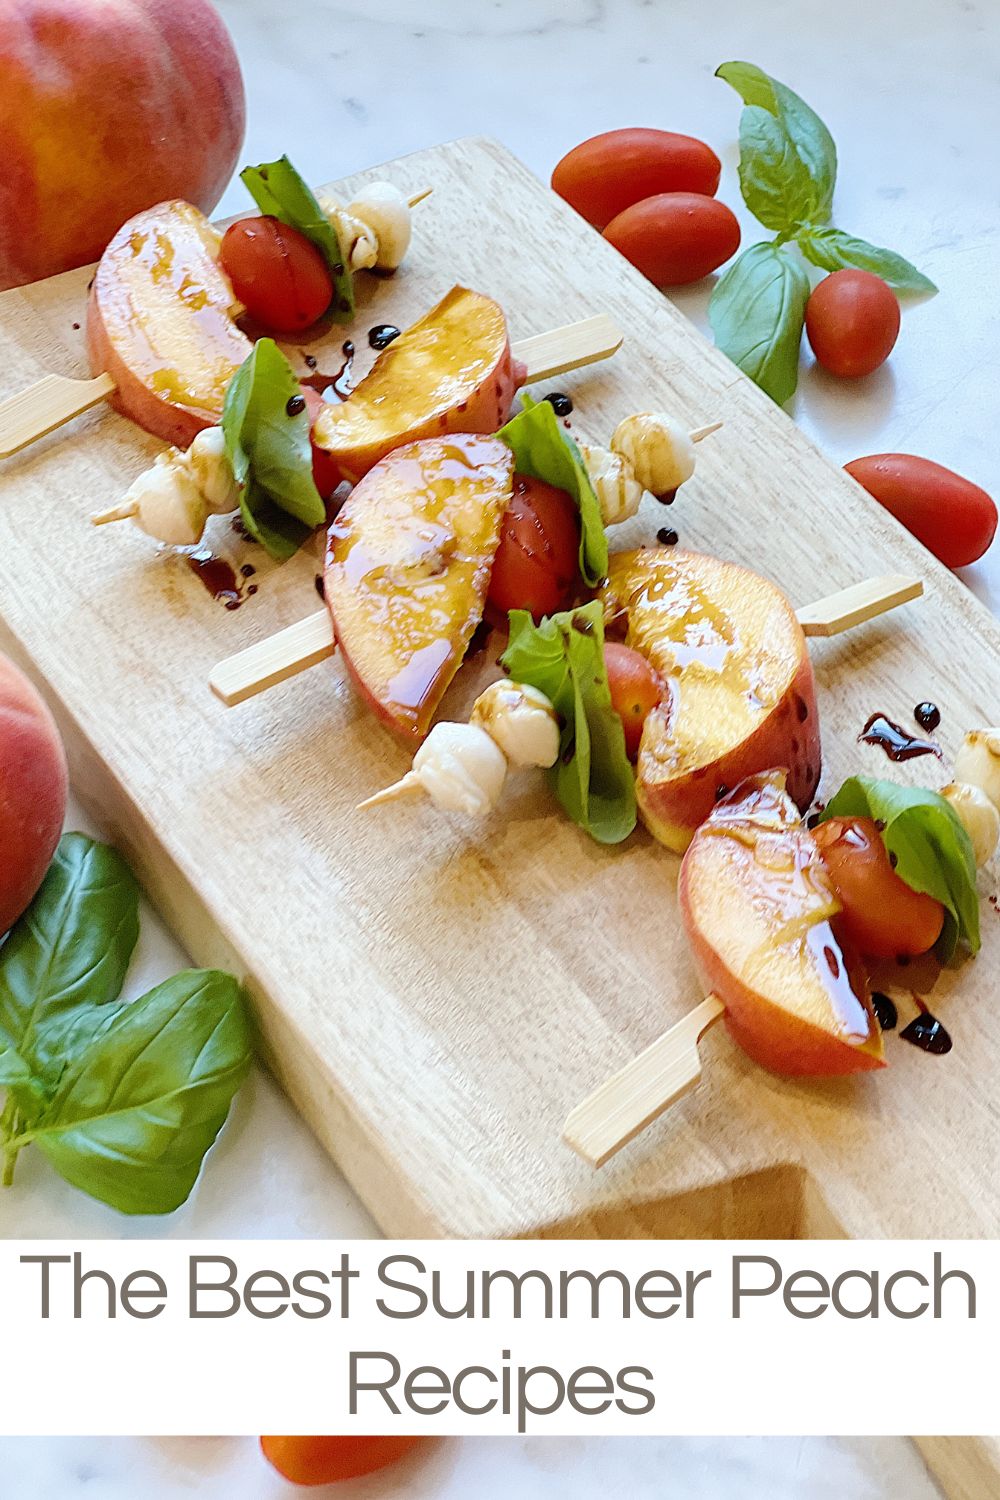 The warm days of summer bring with them many delightful fruits, and one that steals the spotlight is the peach. Peach recipes are my favorite.